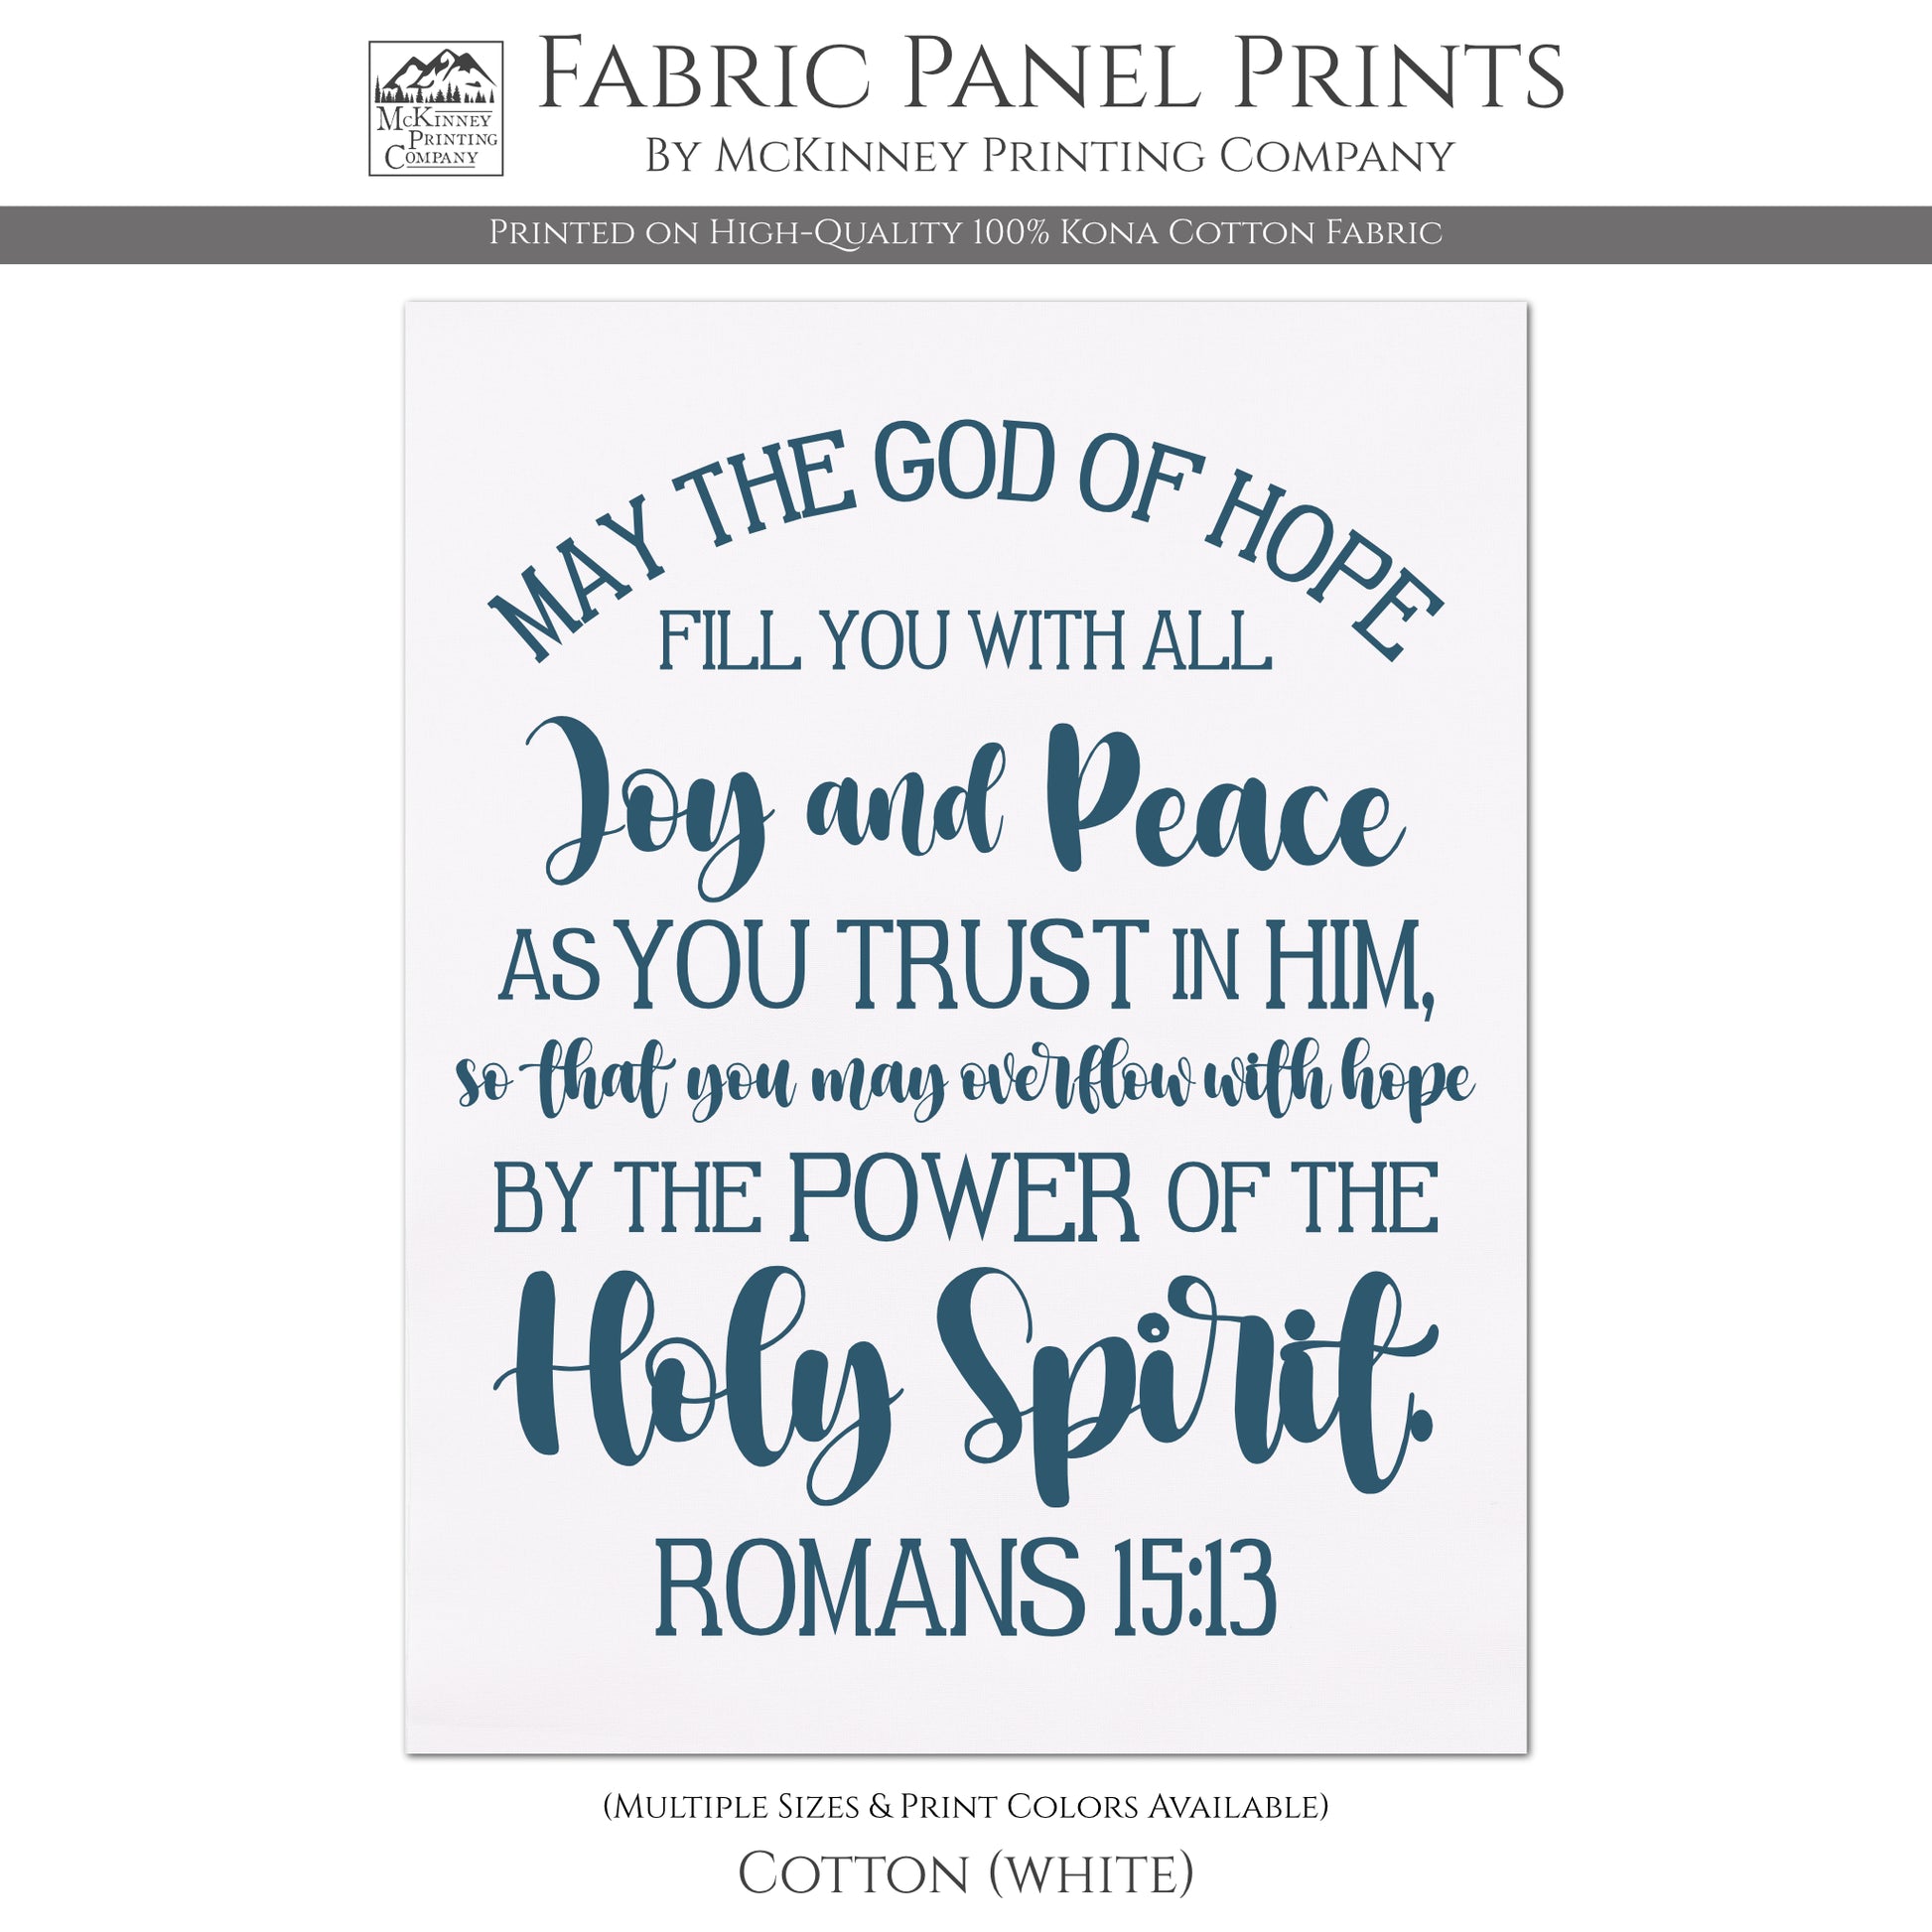 Romans 5:13 - May the God of hope fill you with all joy and peace as you trust in Him, so that you may overflow with hope by the power of the Holy Spirit - Romans 15:13 - Fabric Panel Print, Quilt Block - Cotton, White